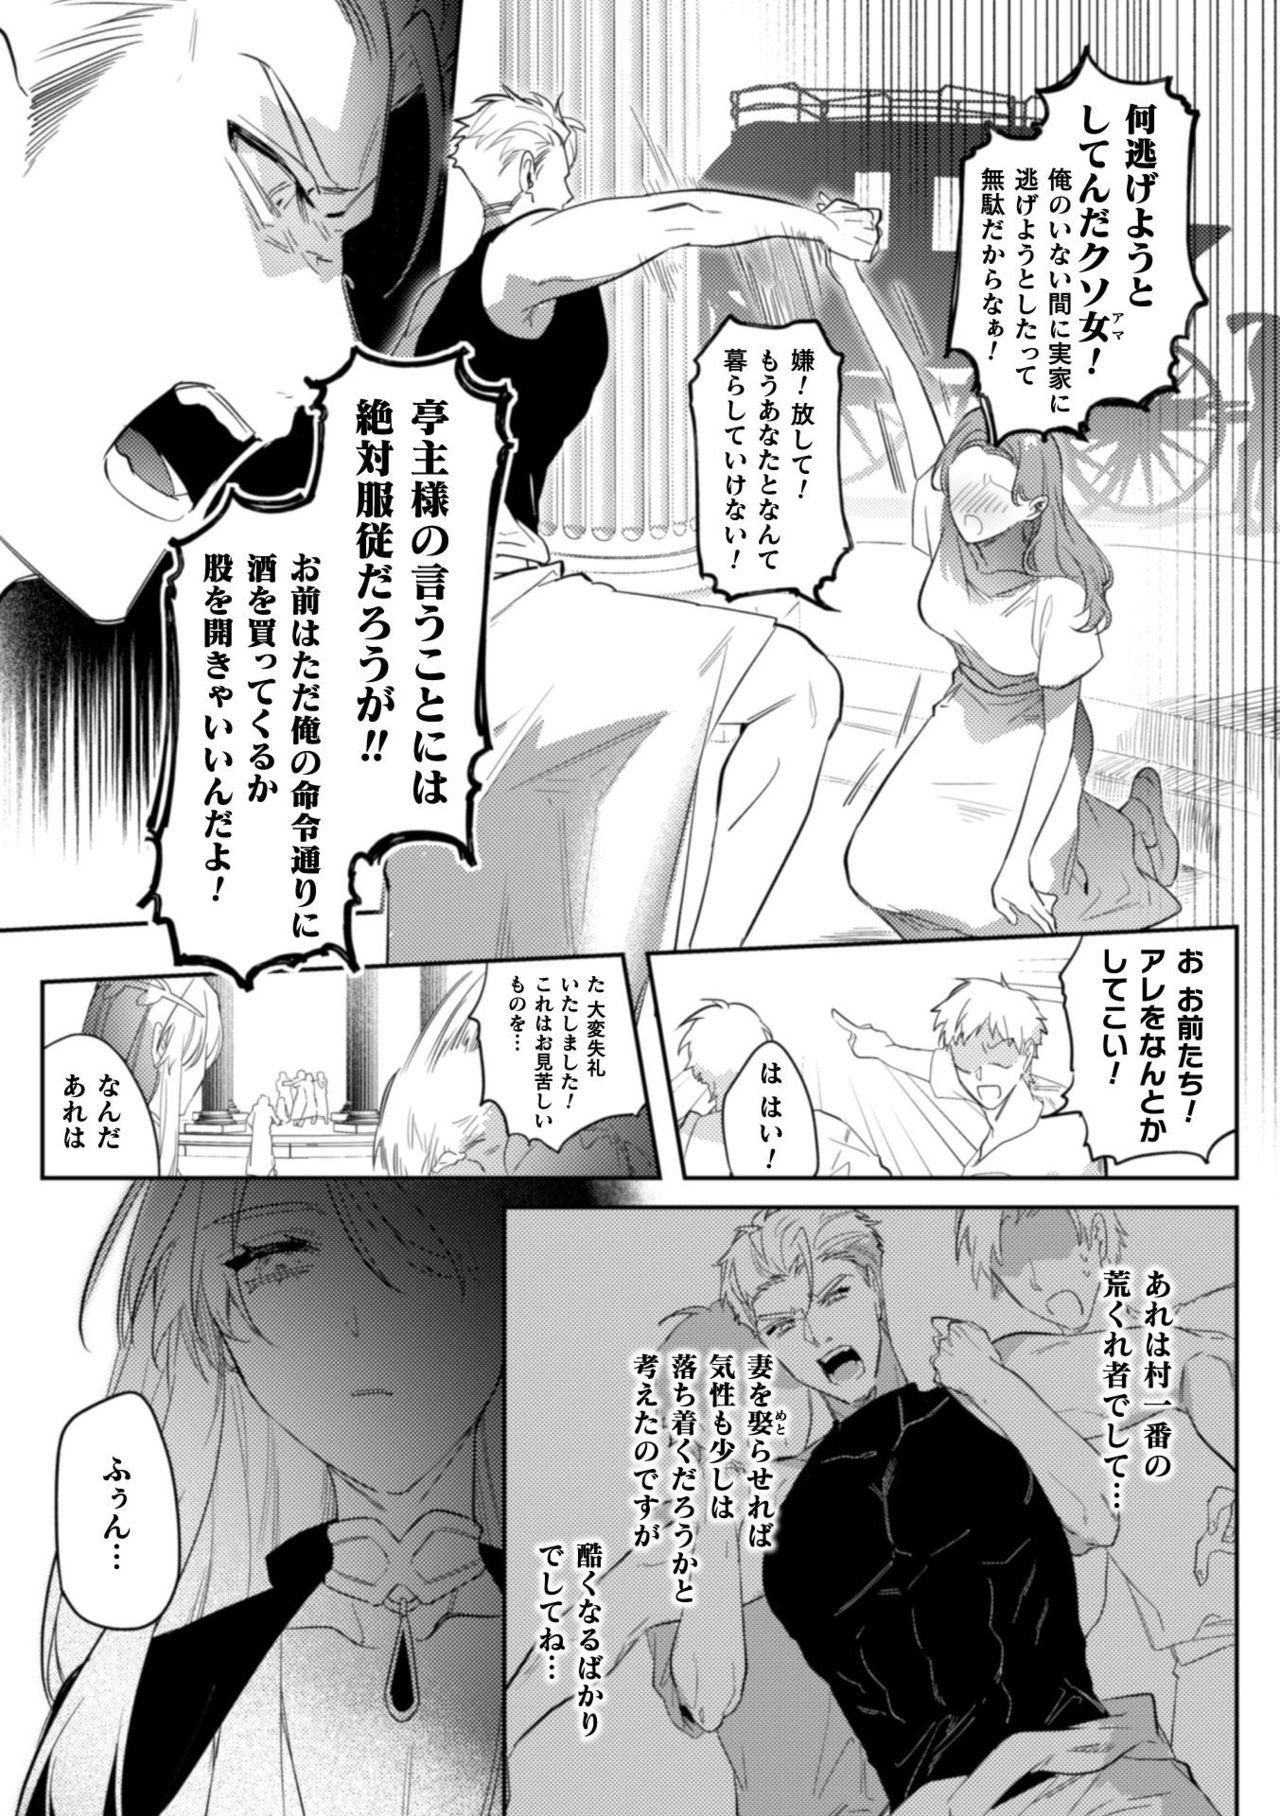 Stretching 淫蕩宮廷史 ～淫帝と呼ばれた美少年～ 第2話 Doggie Style Porn - Page 3